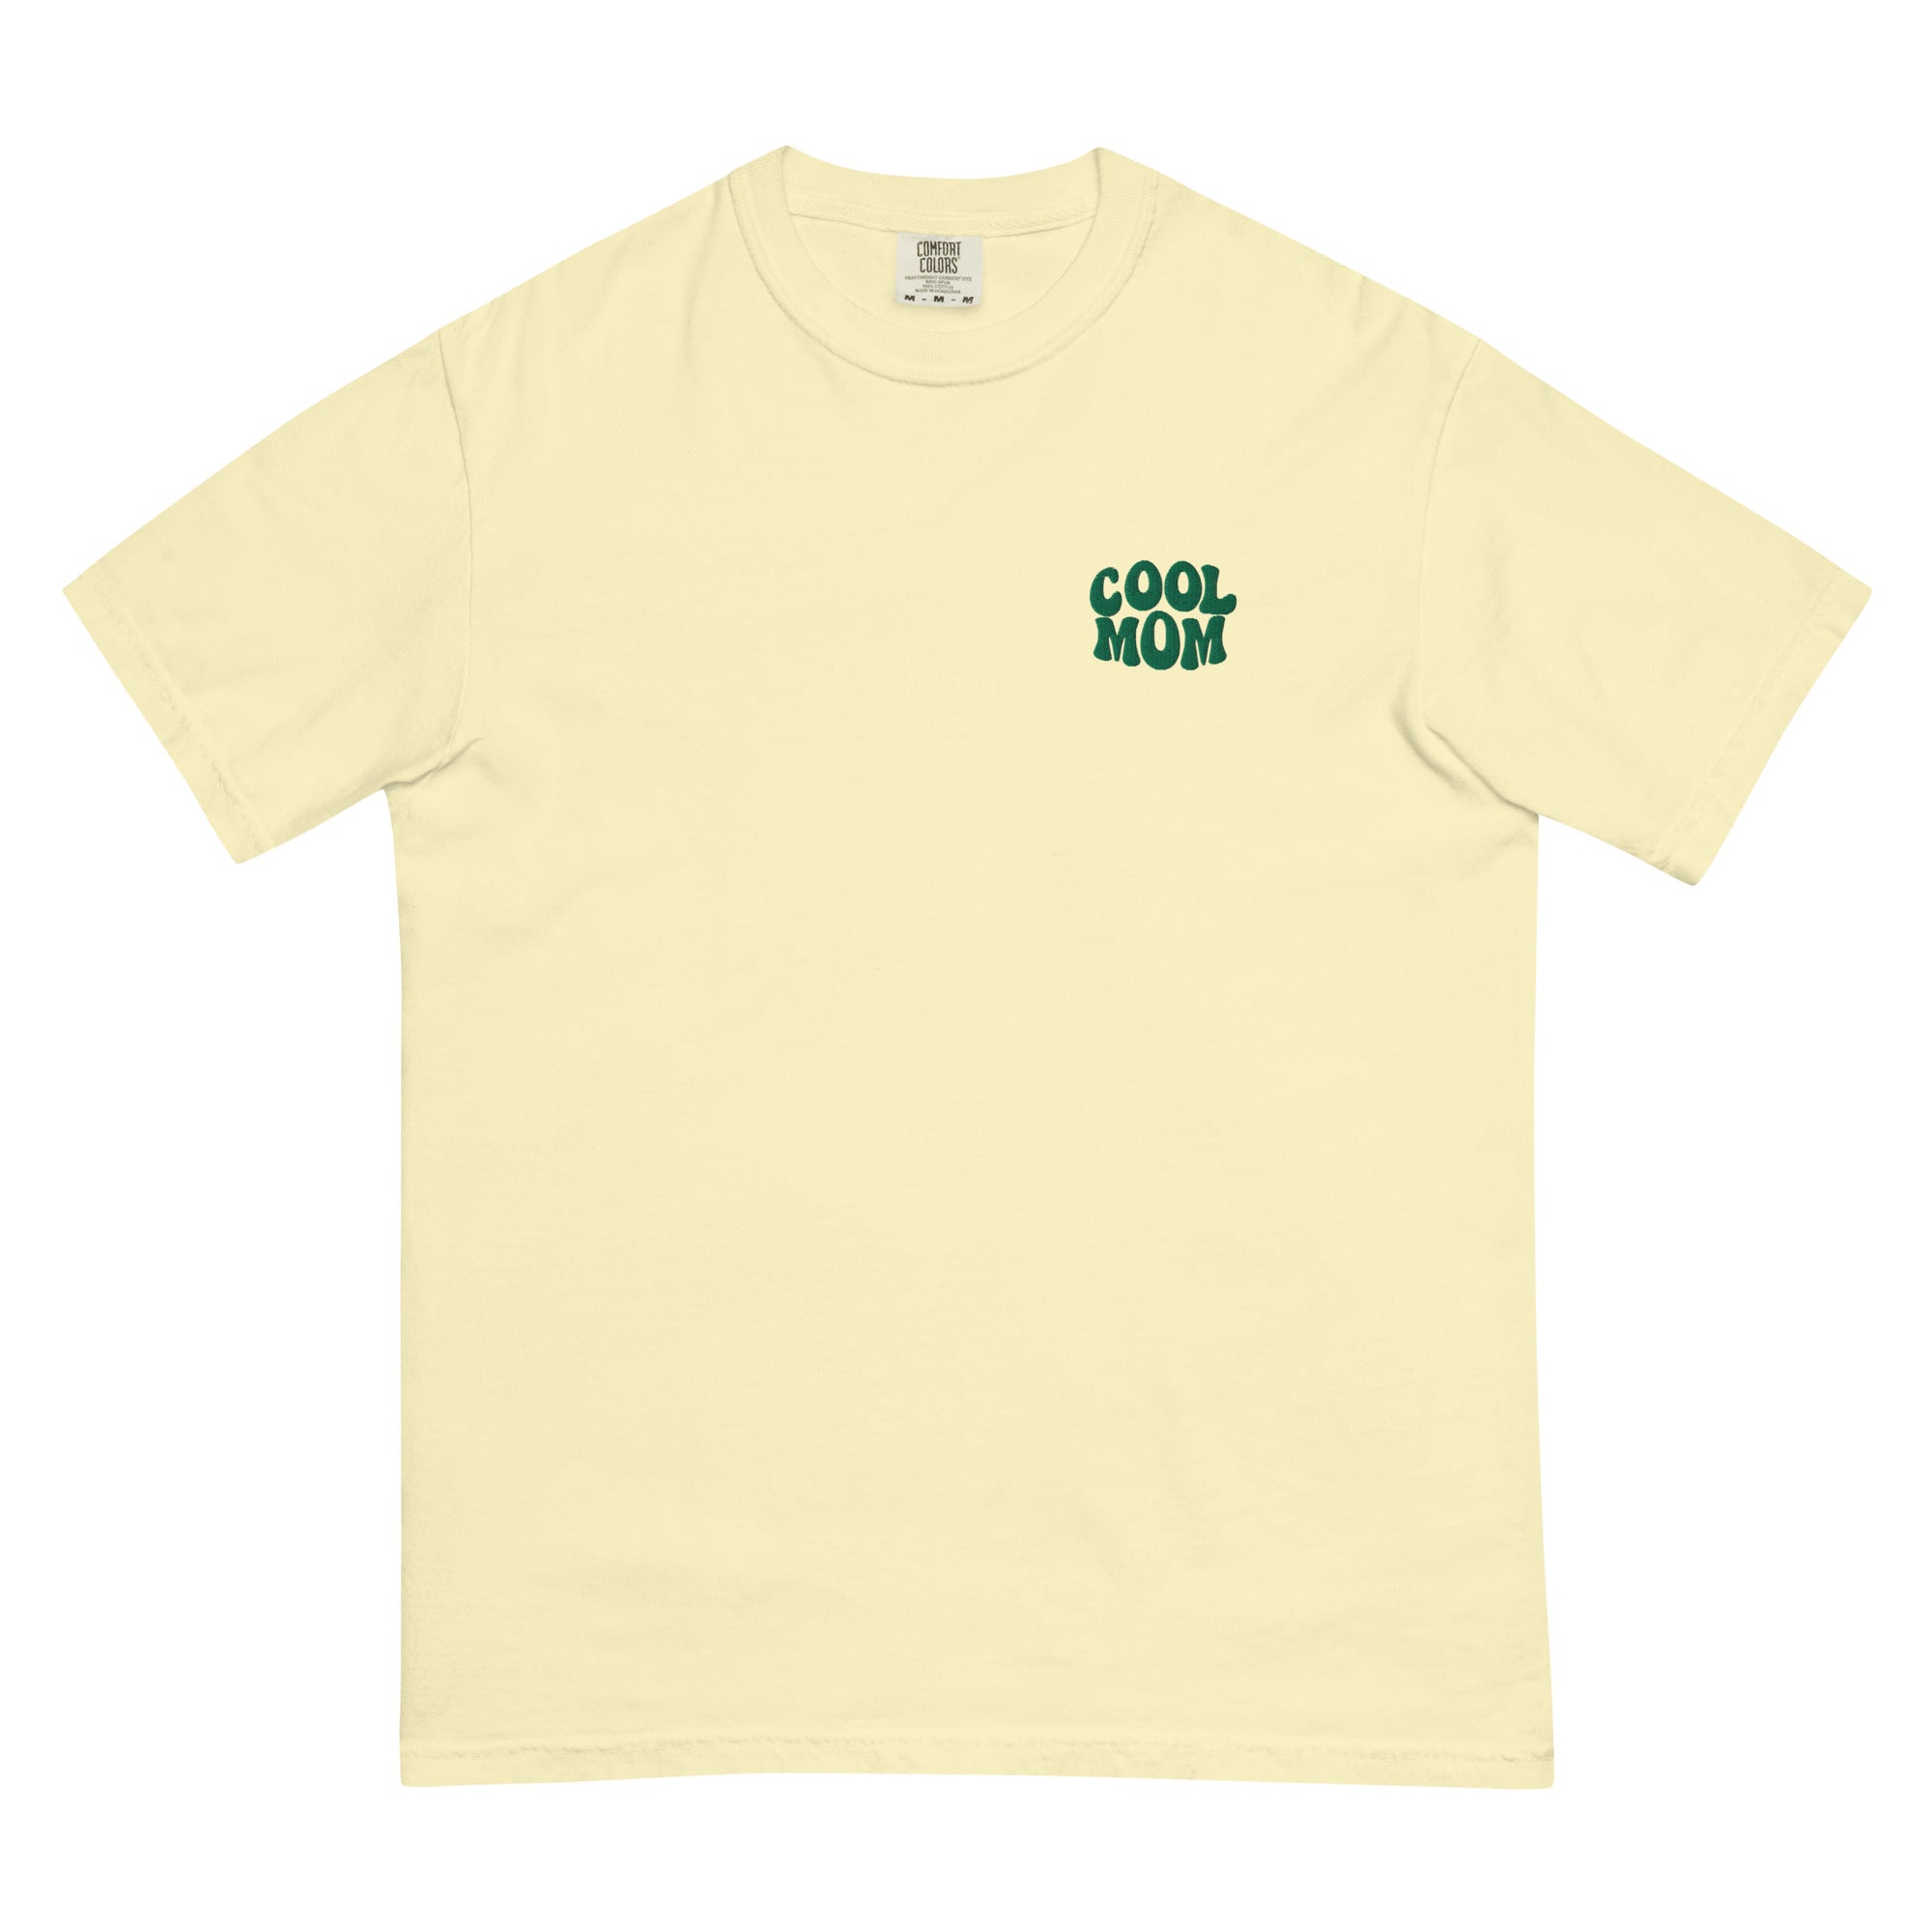 COOL MOM embroidered comfort colors tee